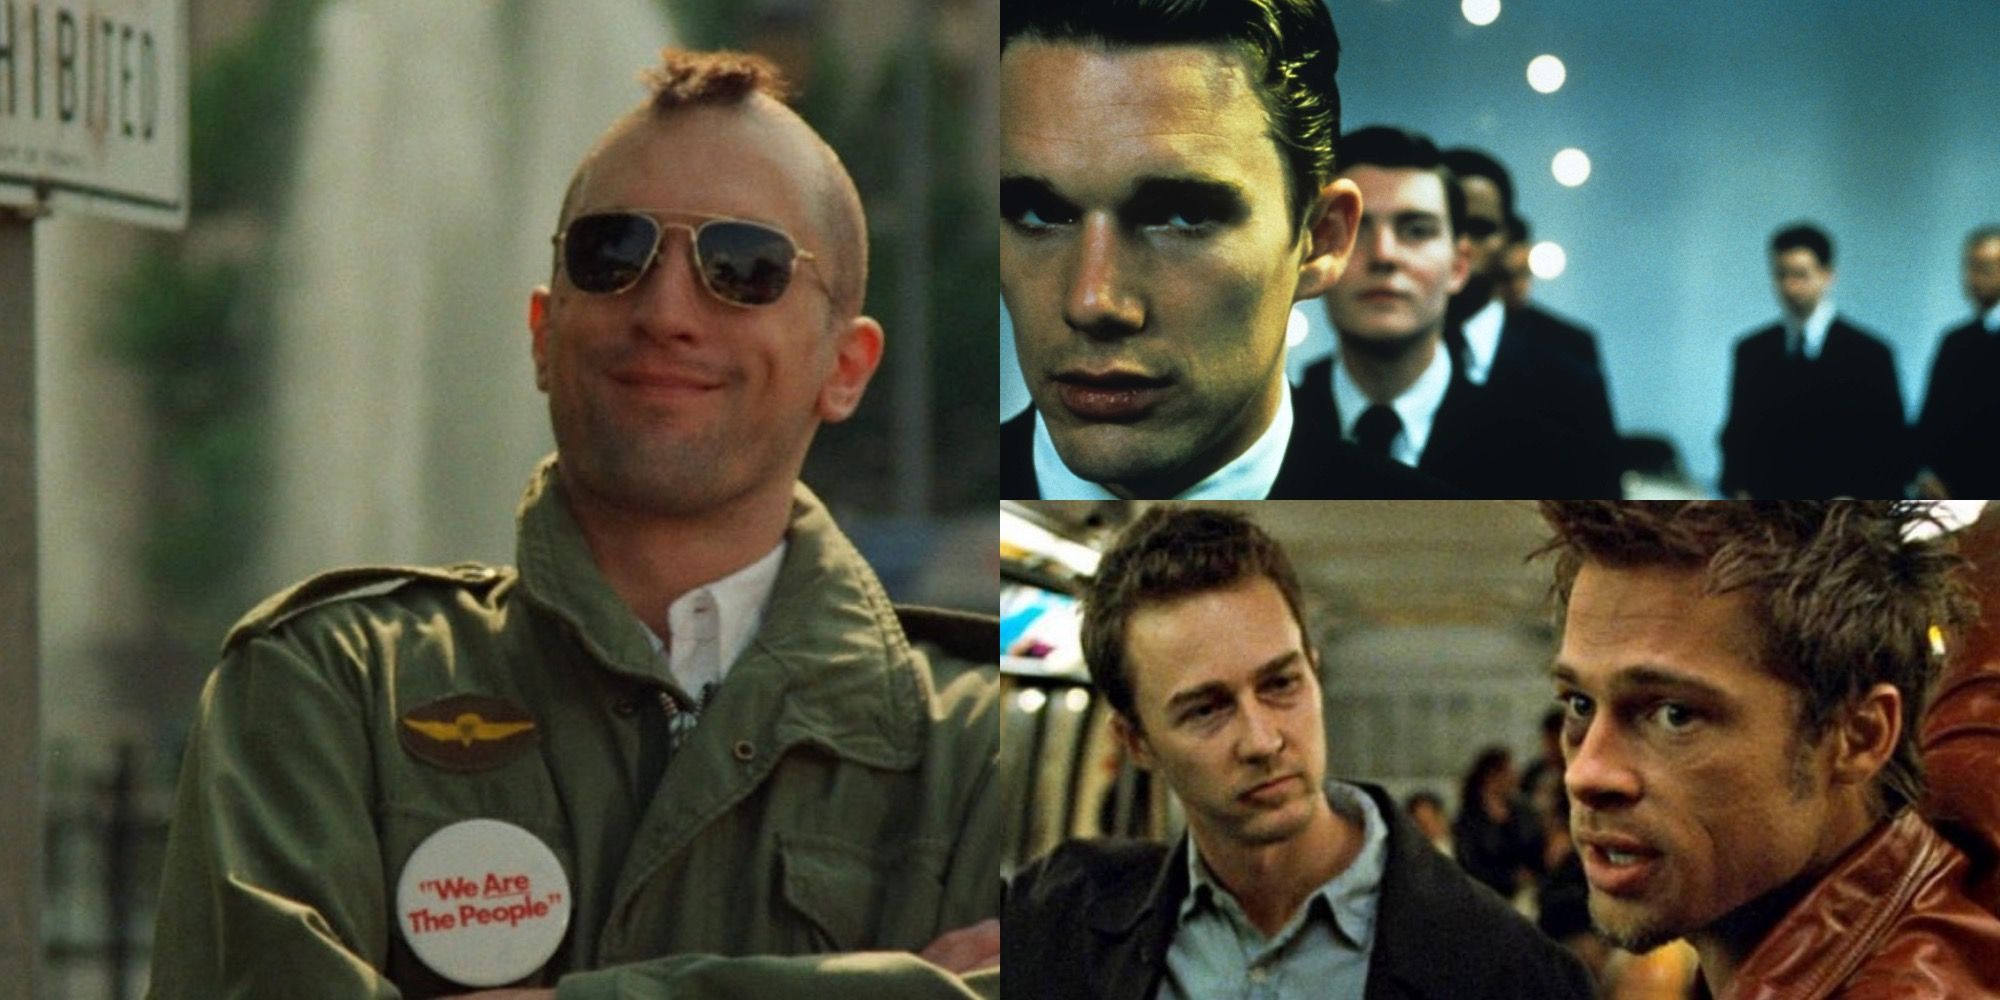 Taxi Driver, Gattaca, and Fight Club